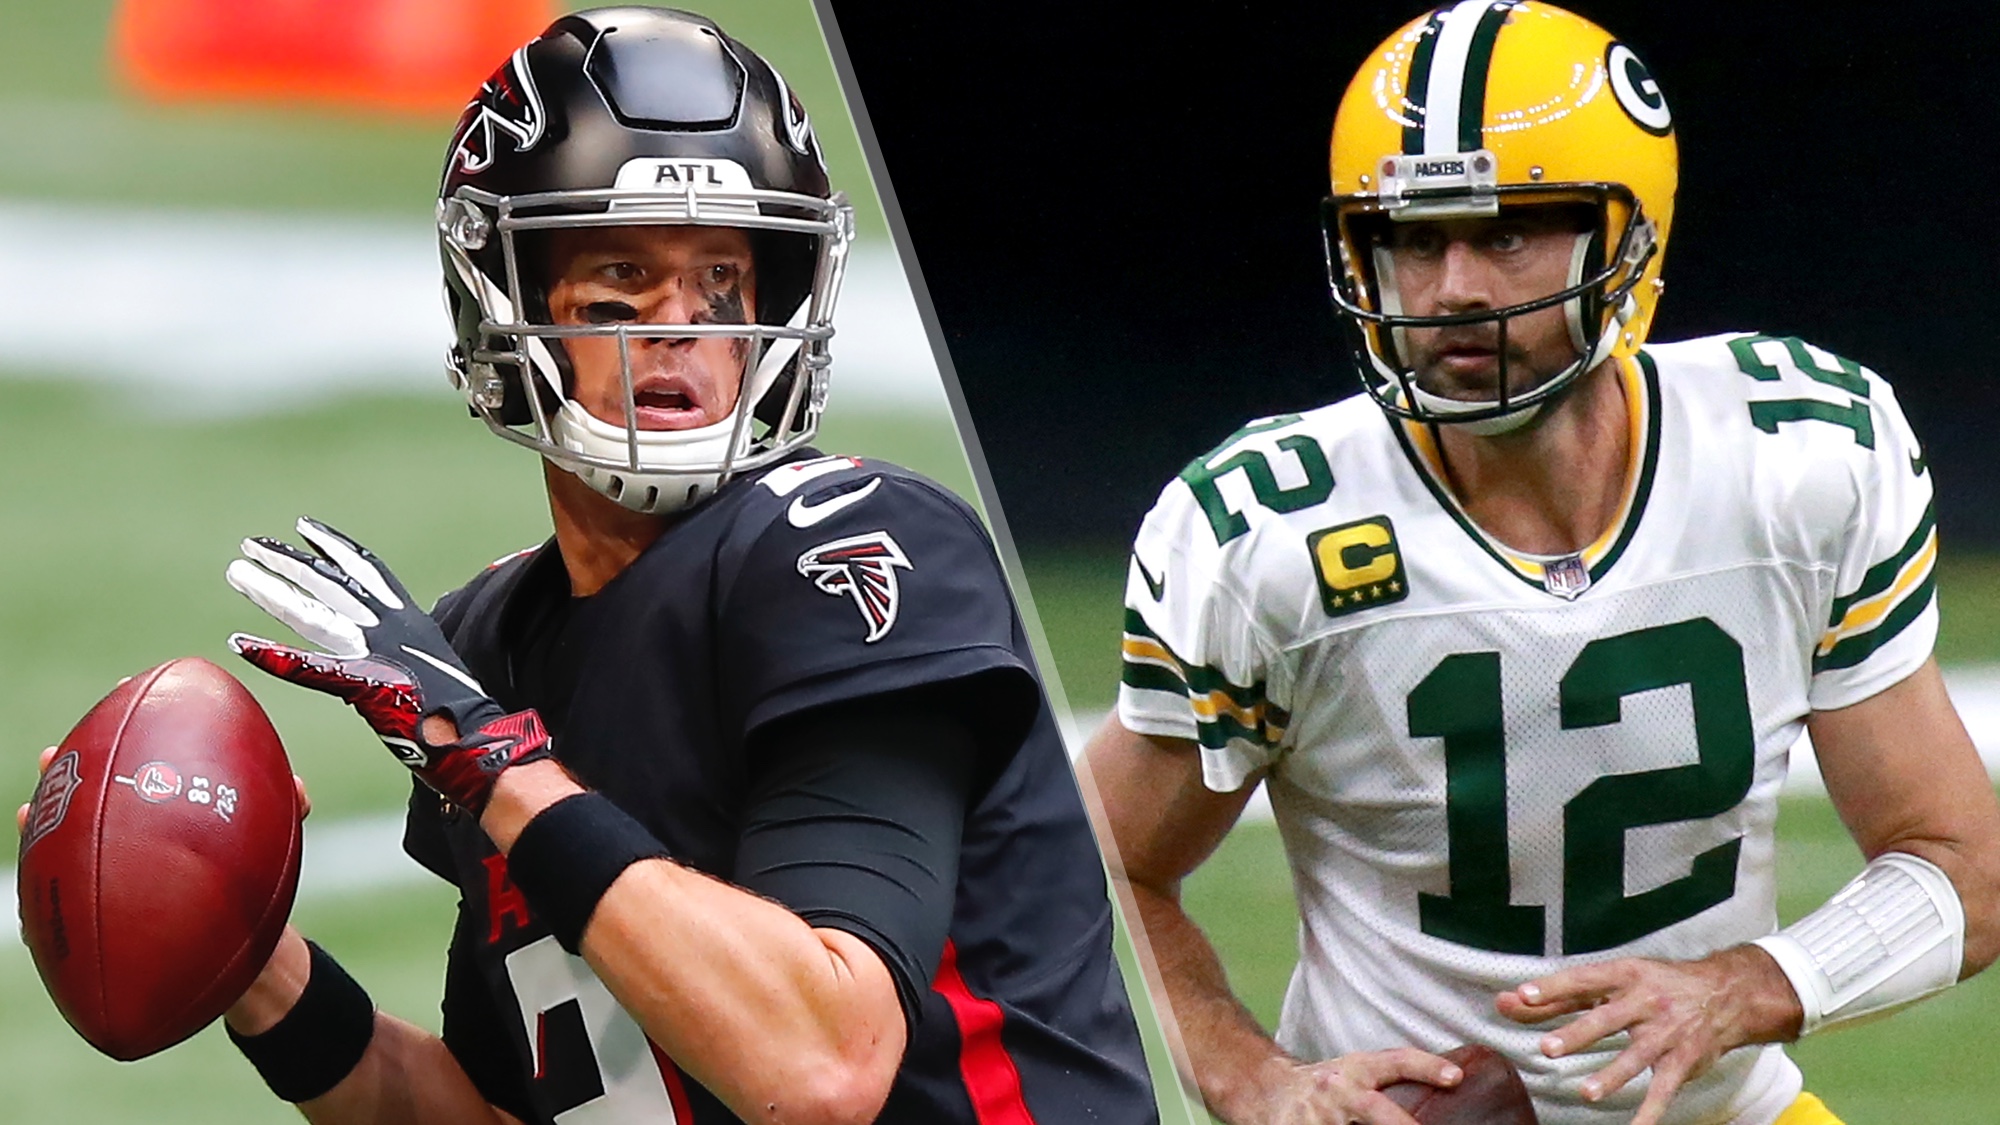 Packers vs. Falcons Livestream: How to Watch NFL Week 2 Online